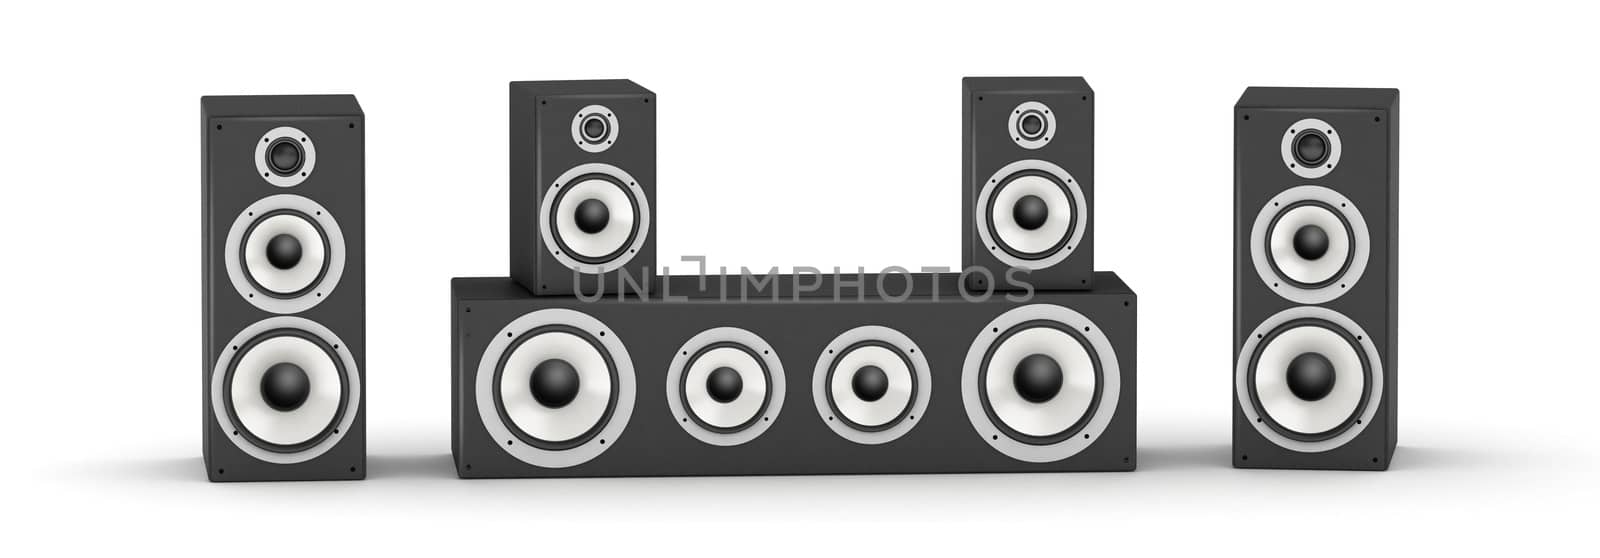 Set of speakers for home theater hi-fi audio system on white background